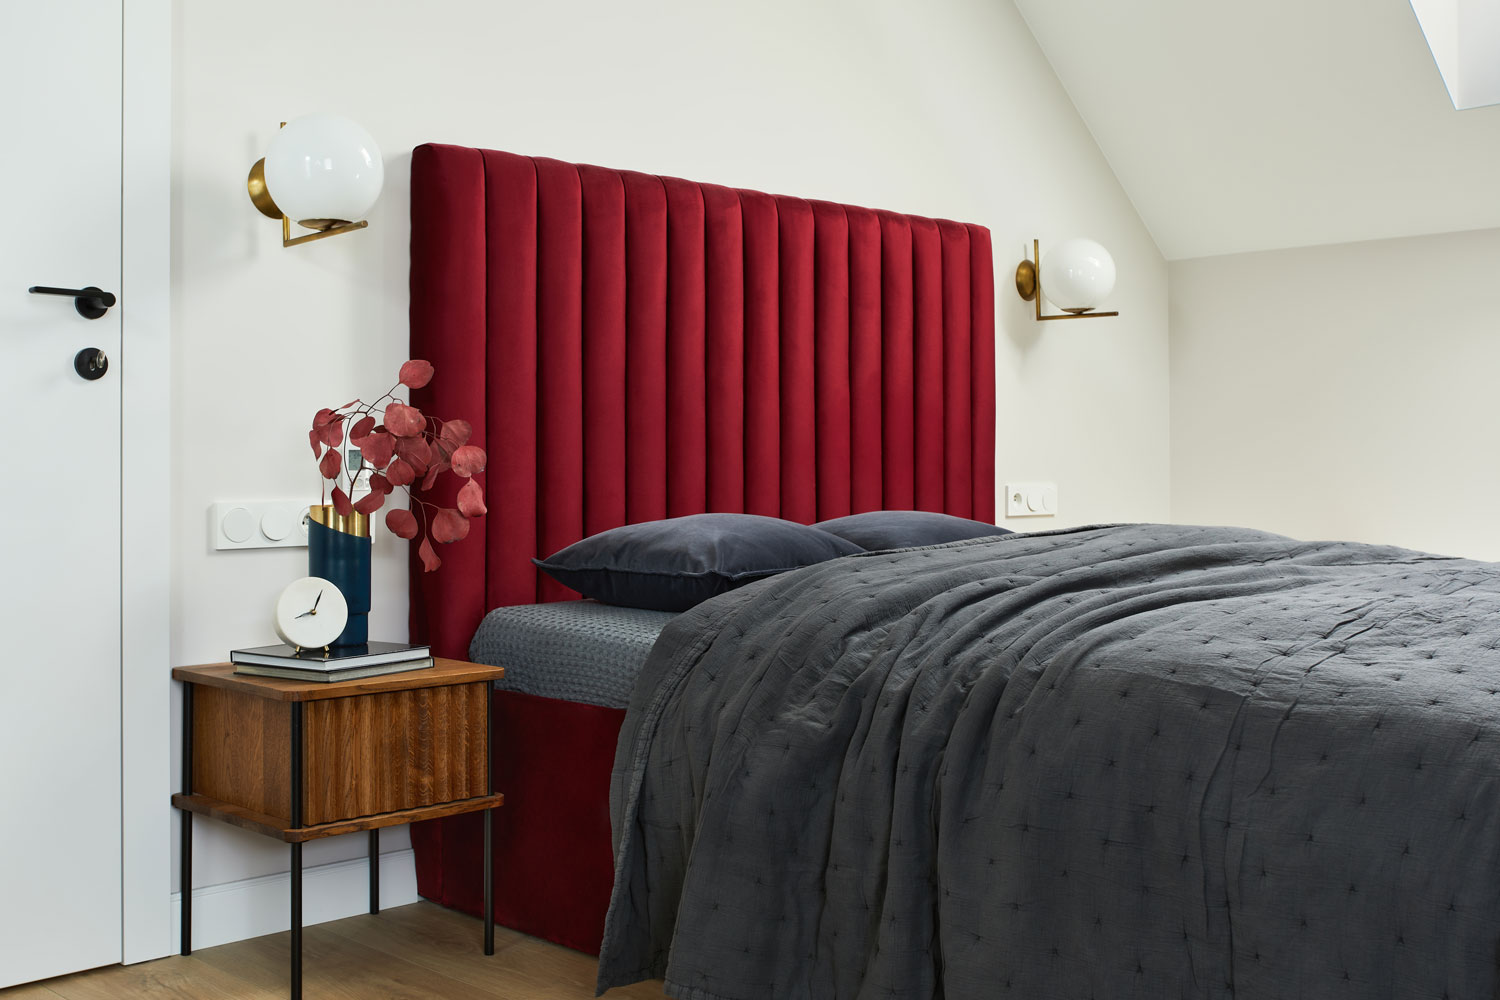 A red headboard for a dark gray bed inside a white bedroom